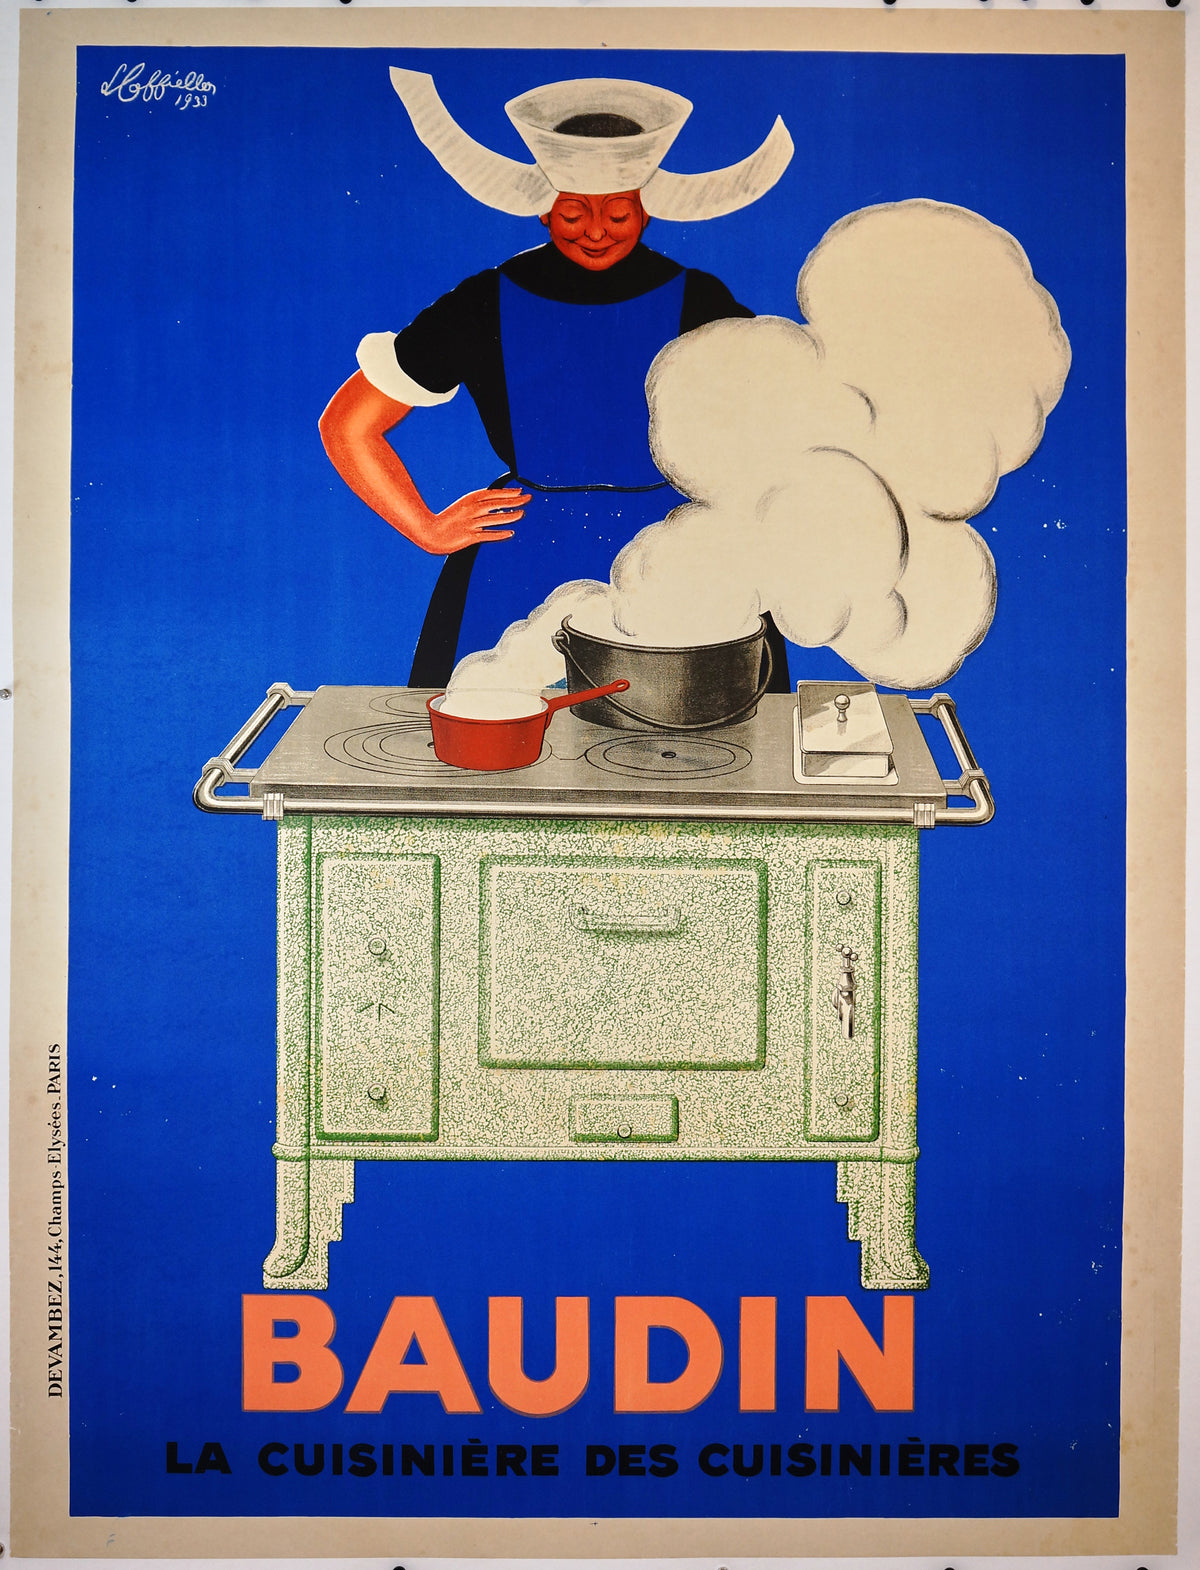 Baudin by Leonetto Cappiello - Authentic Vintage Poster